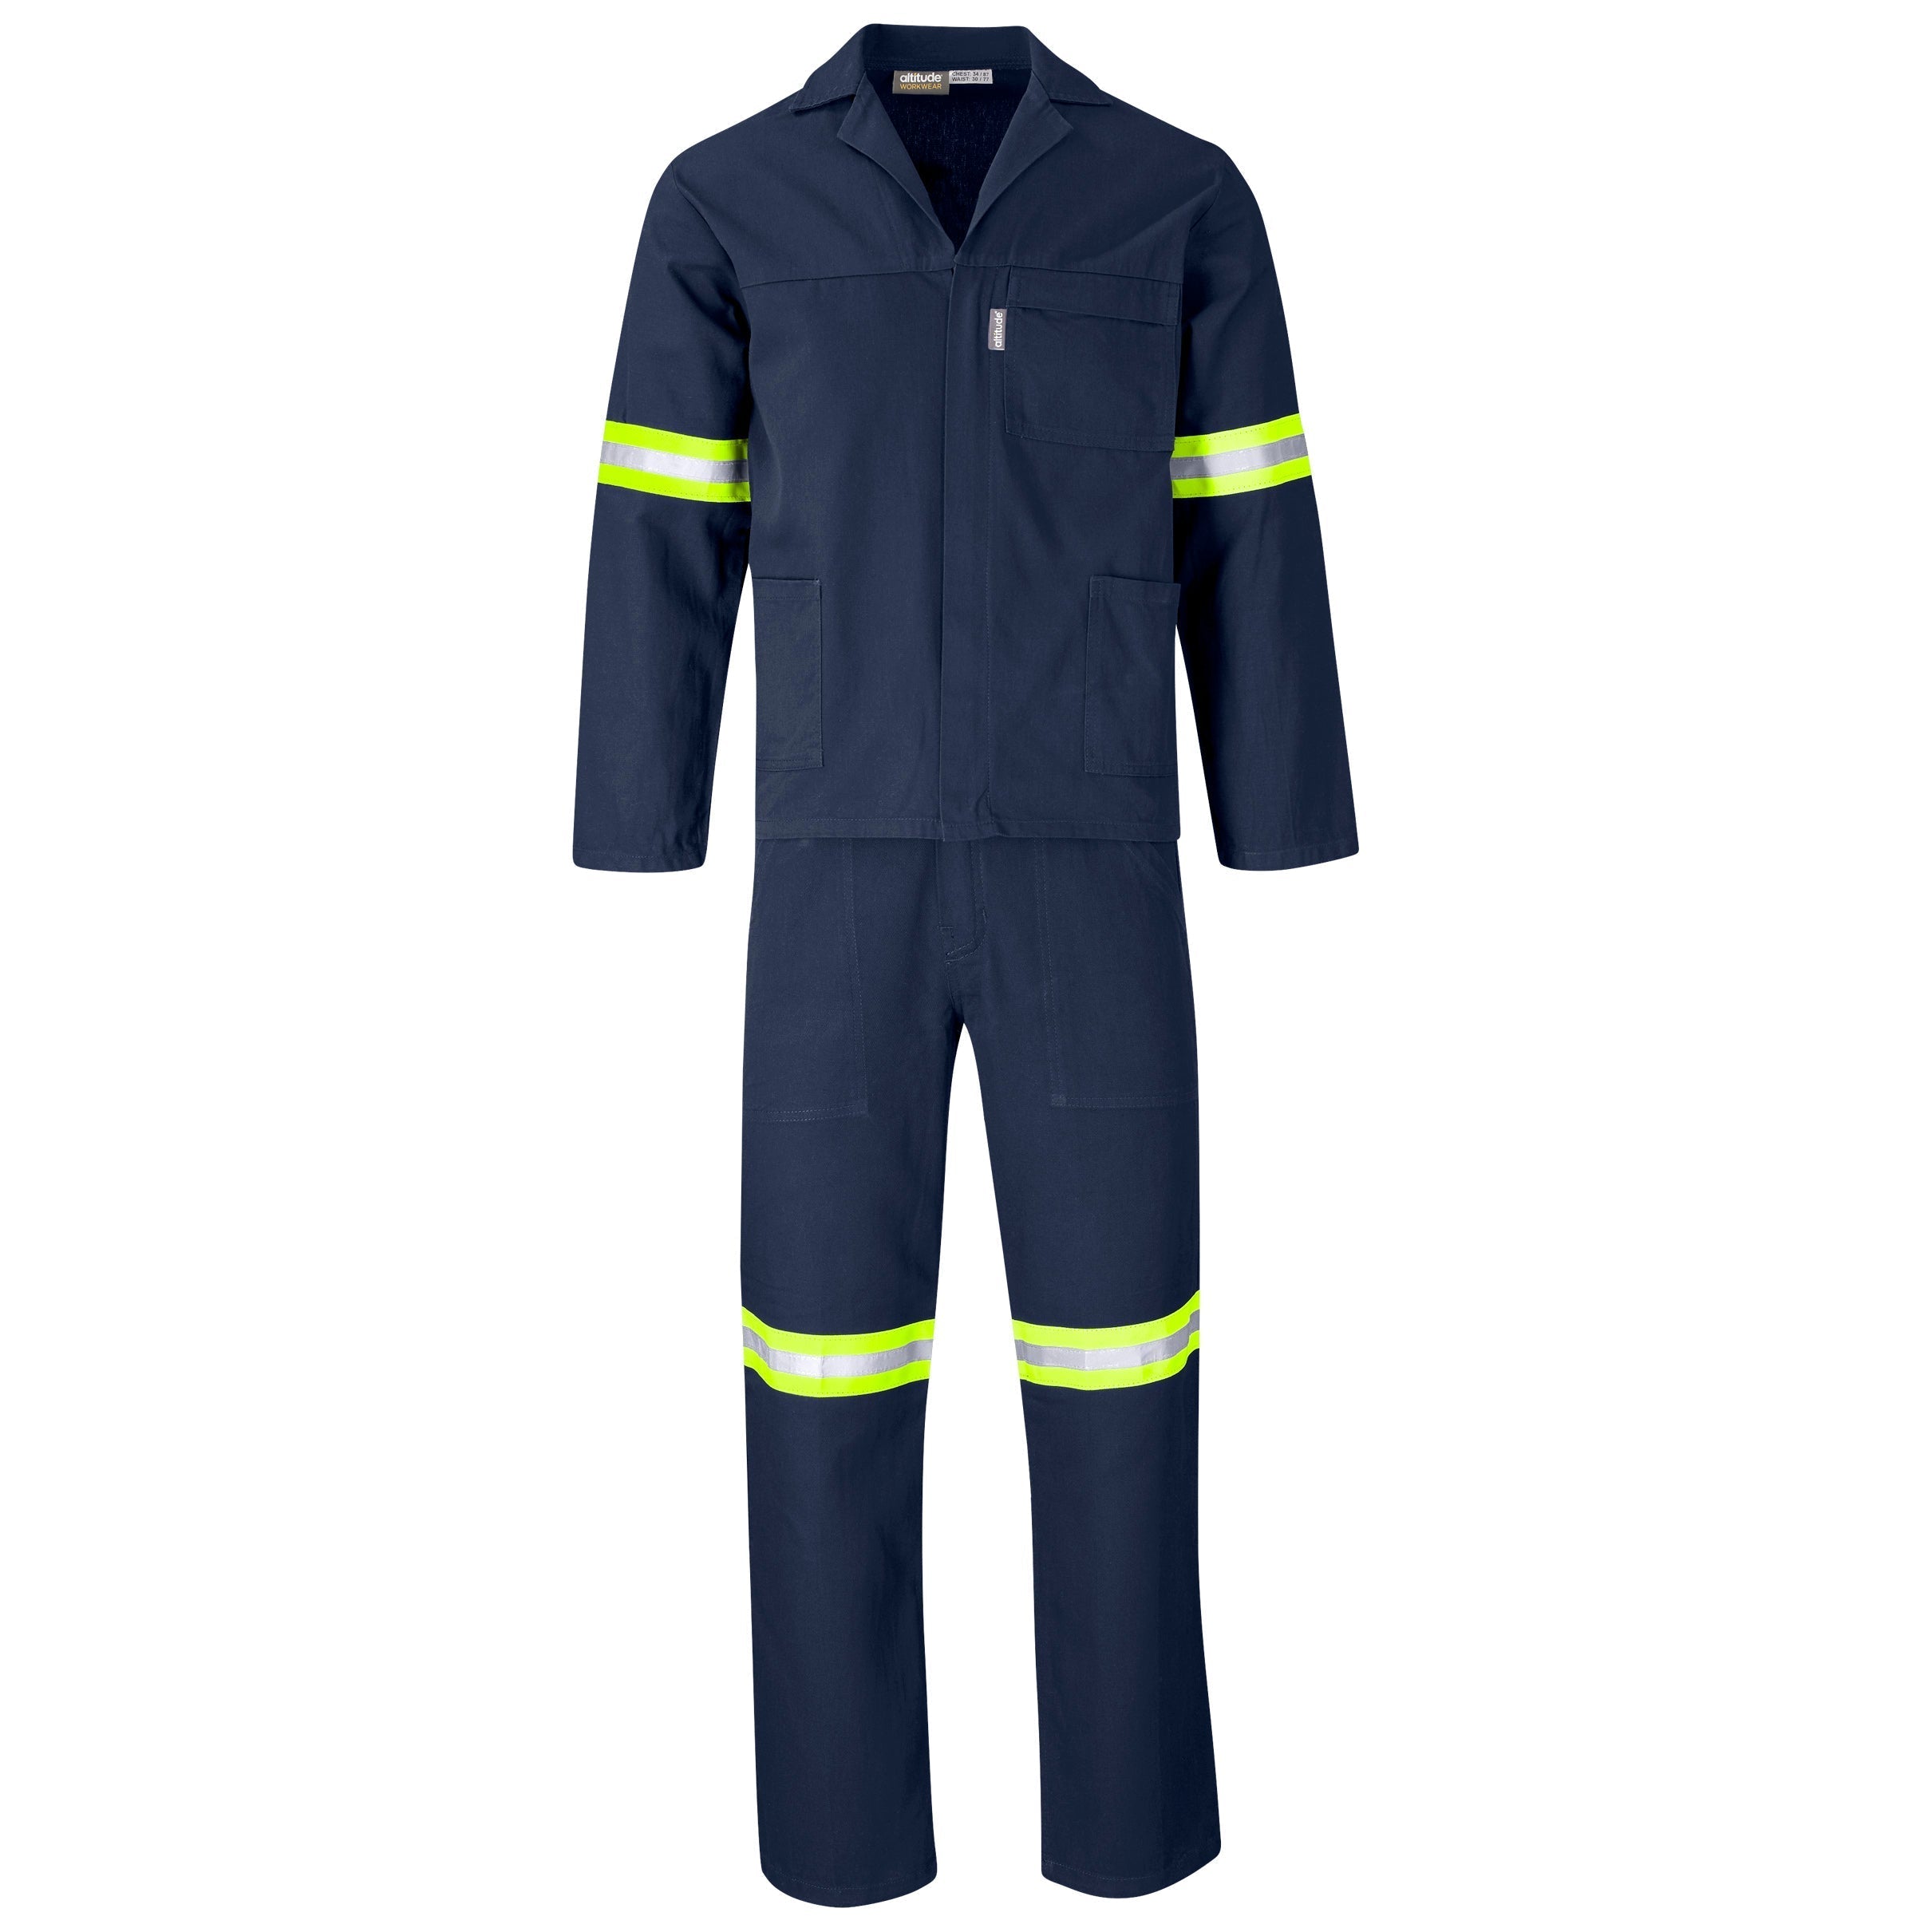 Technician 100% Cotton Conti Suit - Reflective Arms, Legs & Back - Yellow Tape-32-Navy-N